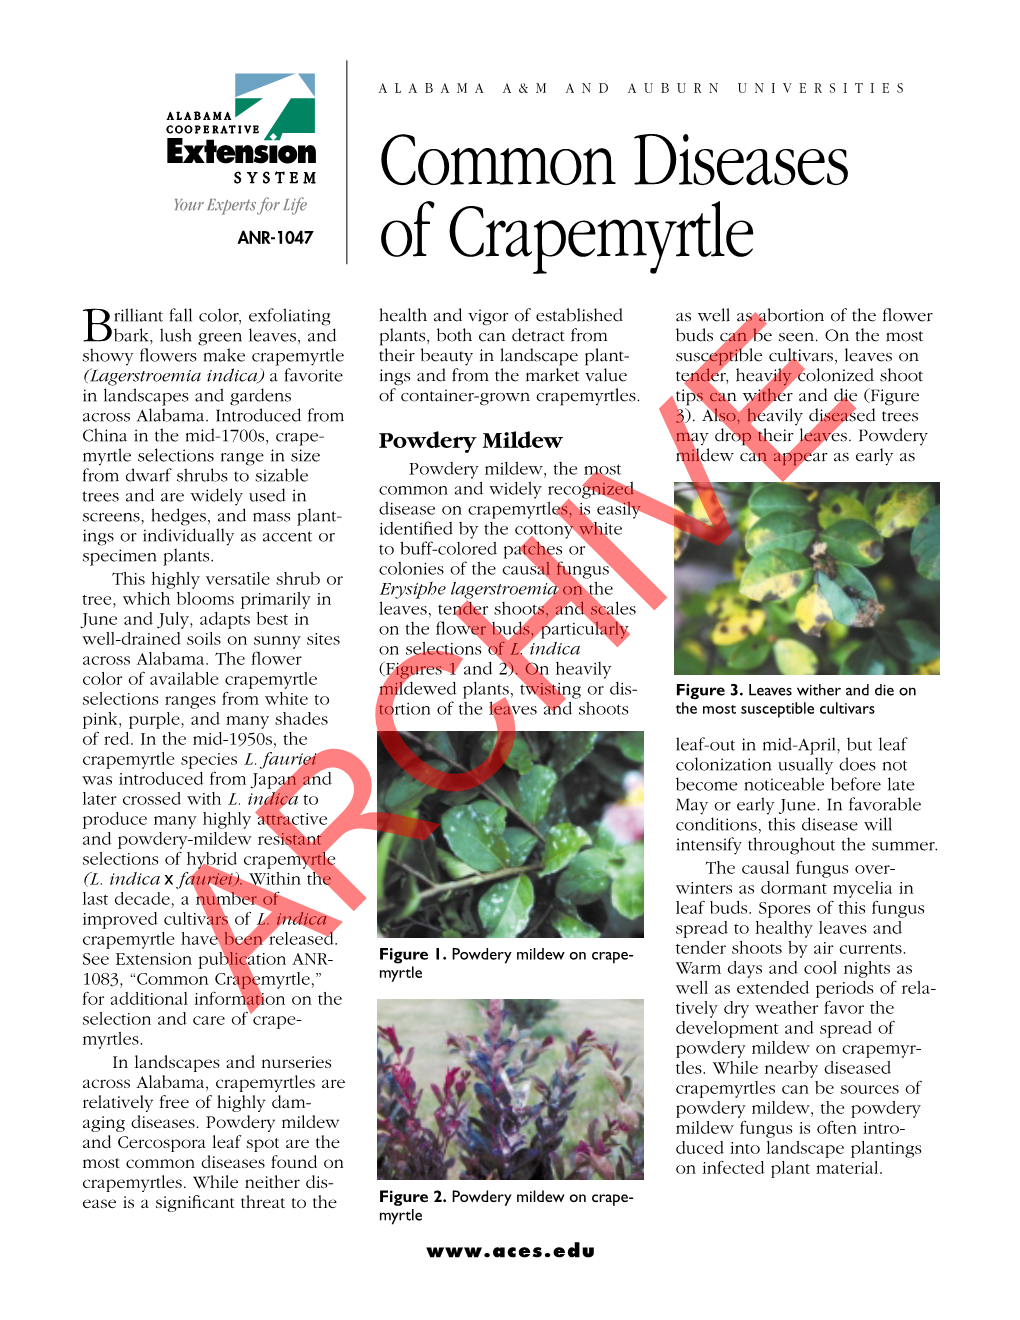 Common Diseases of Crapemyrtle 3 Publishing Co., Champaign, Ill